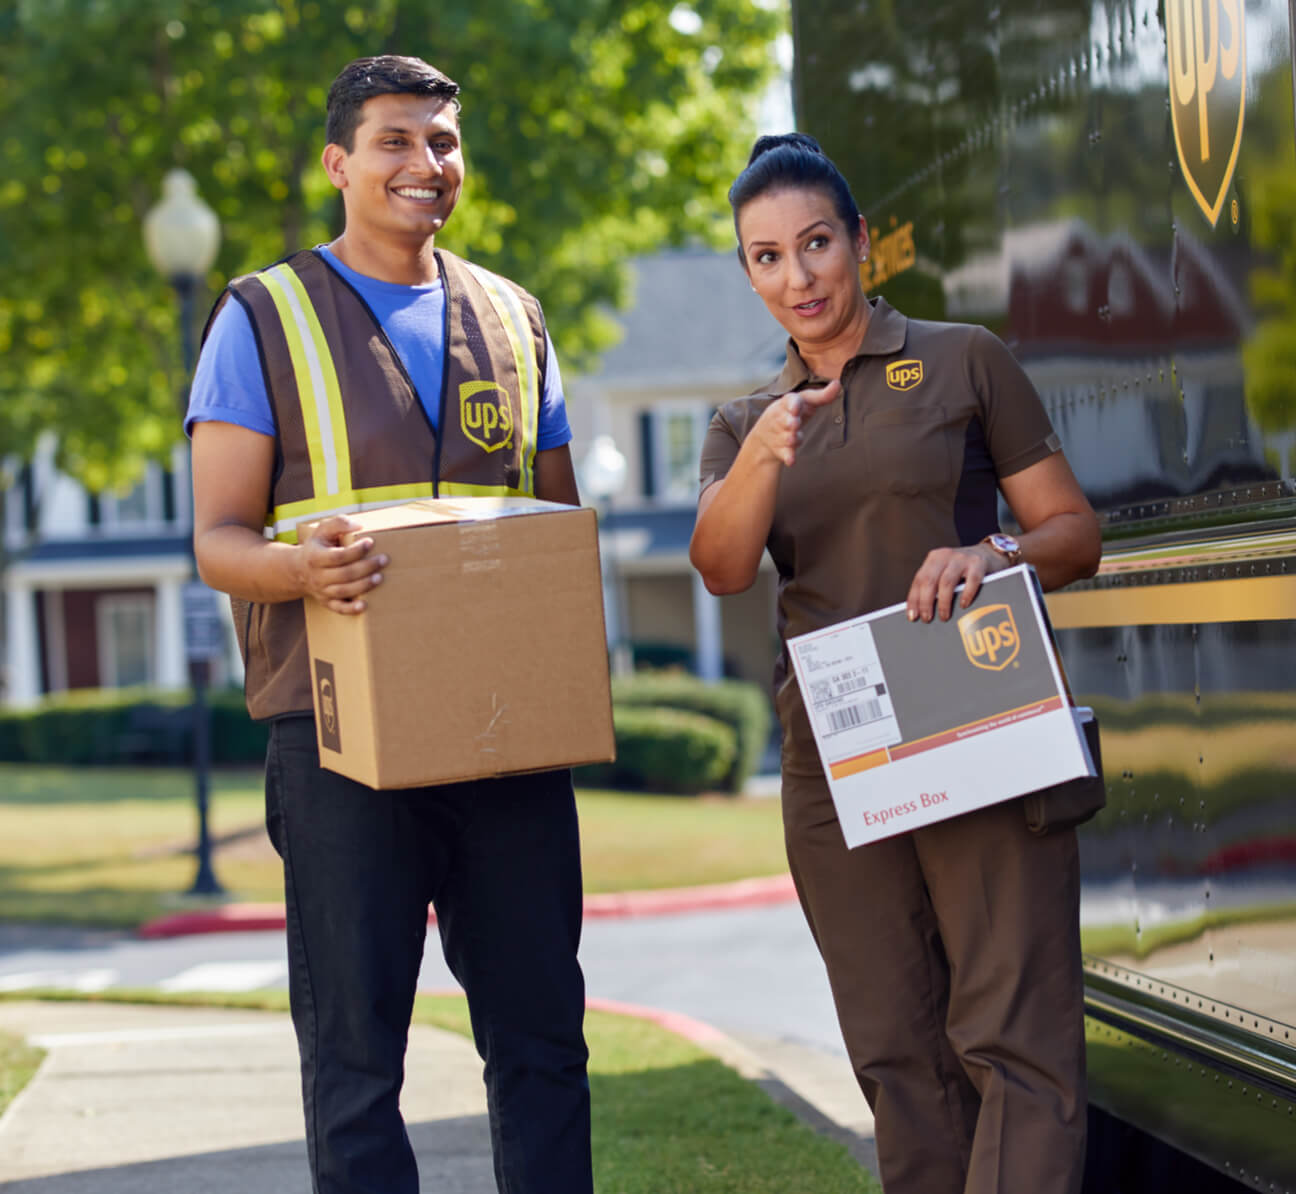 Driver Helpers Careers at UPS